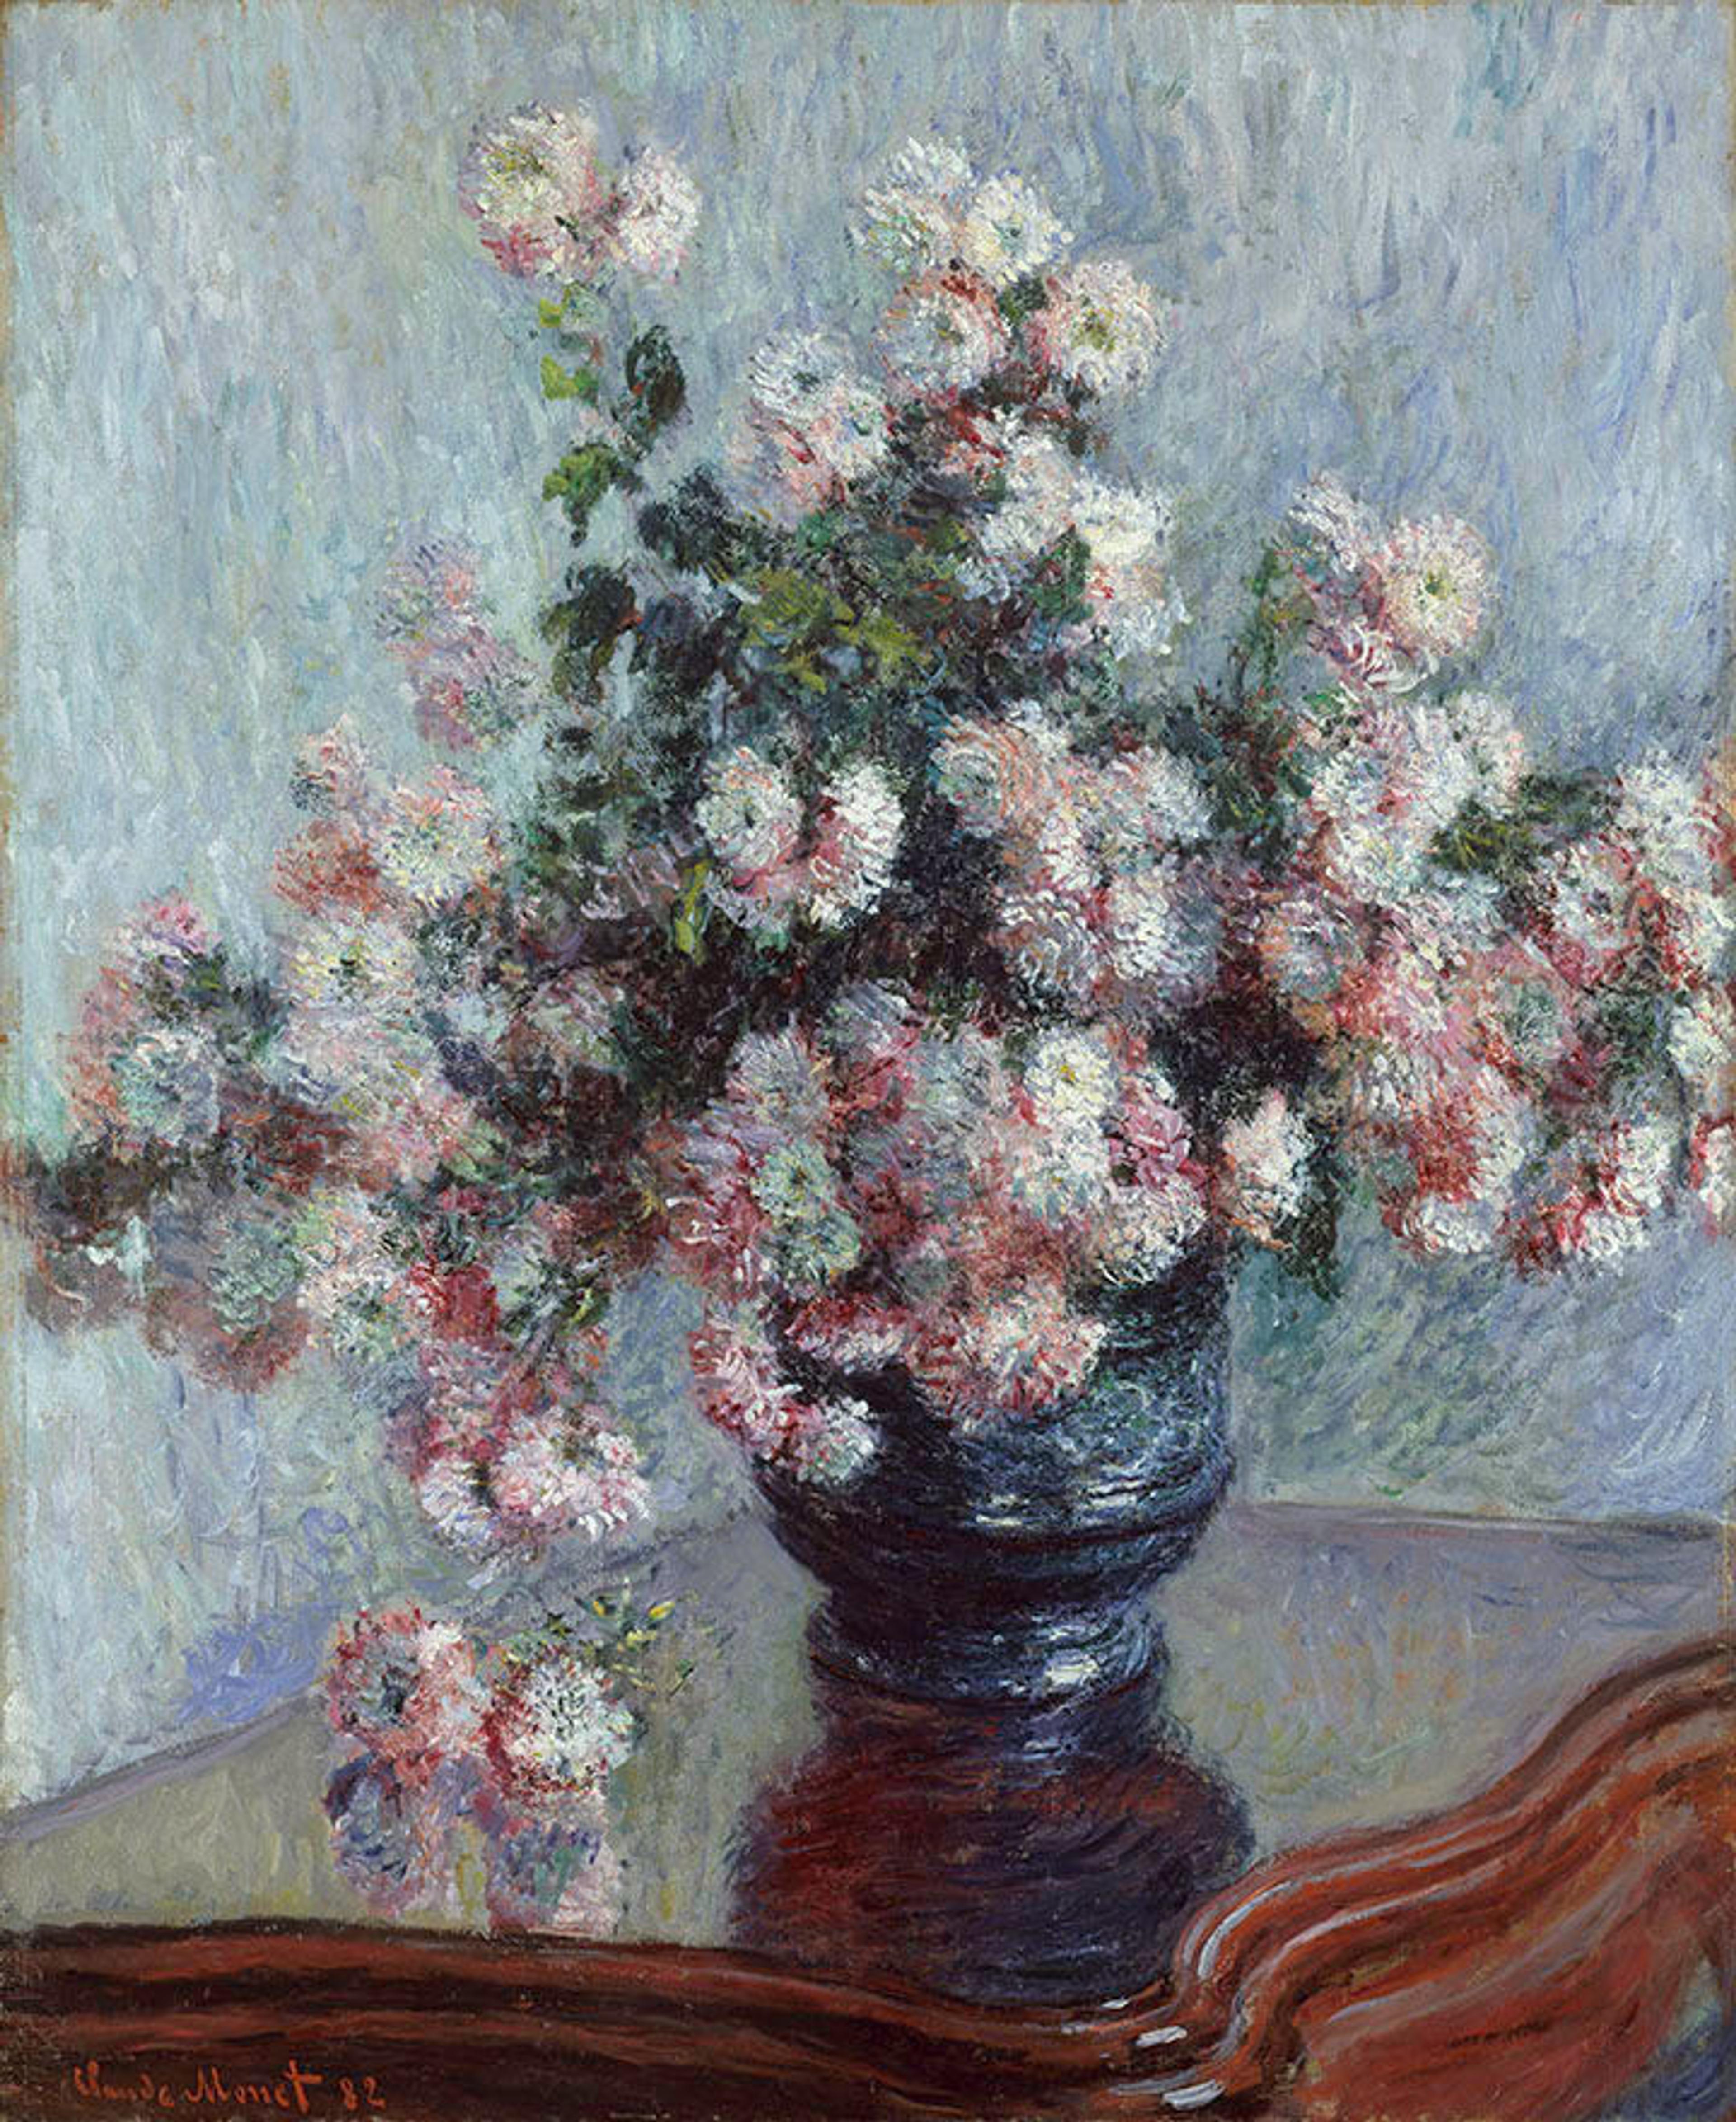 An oil painting of chrysanthemums in a vase atop a wooden table.